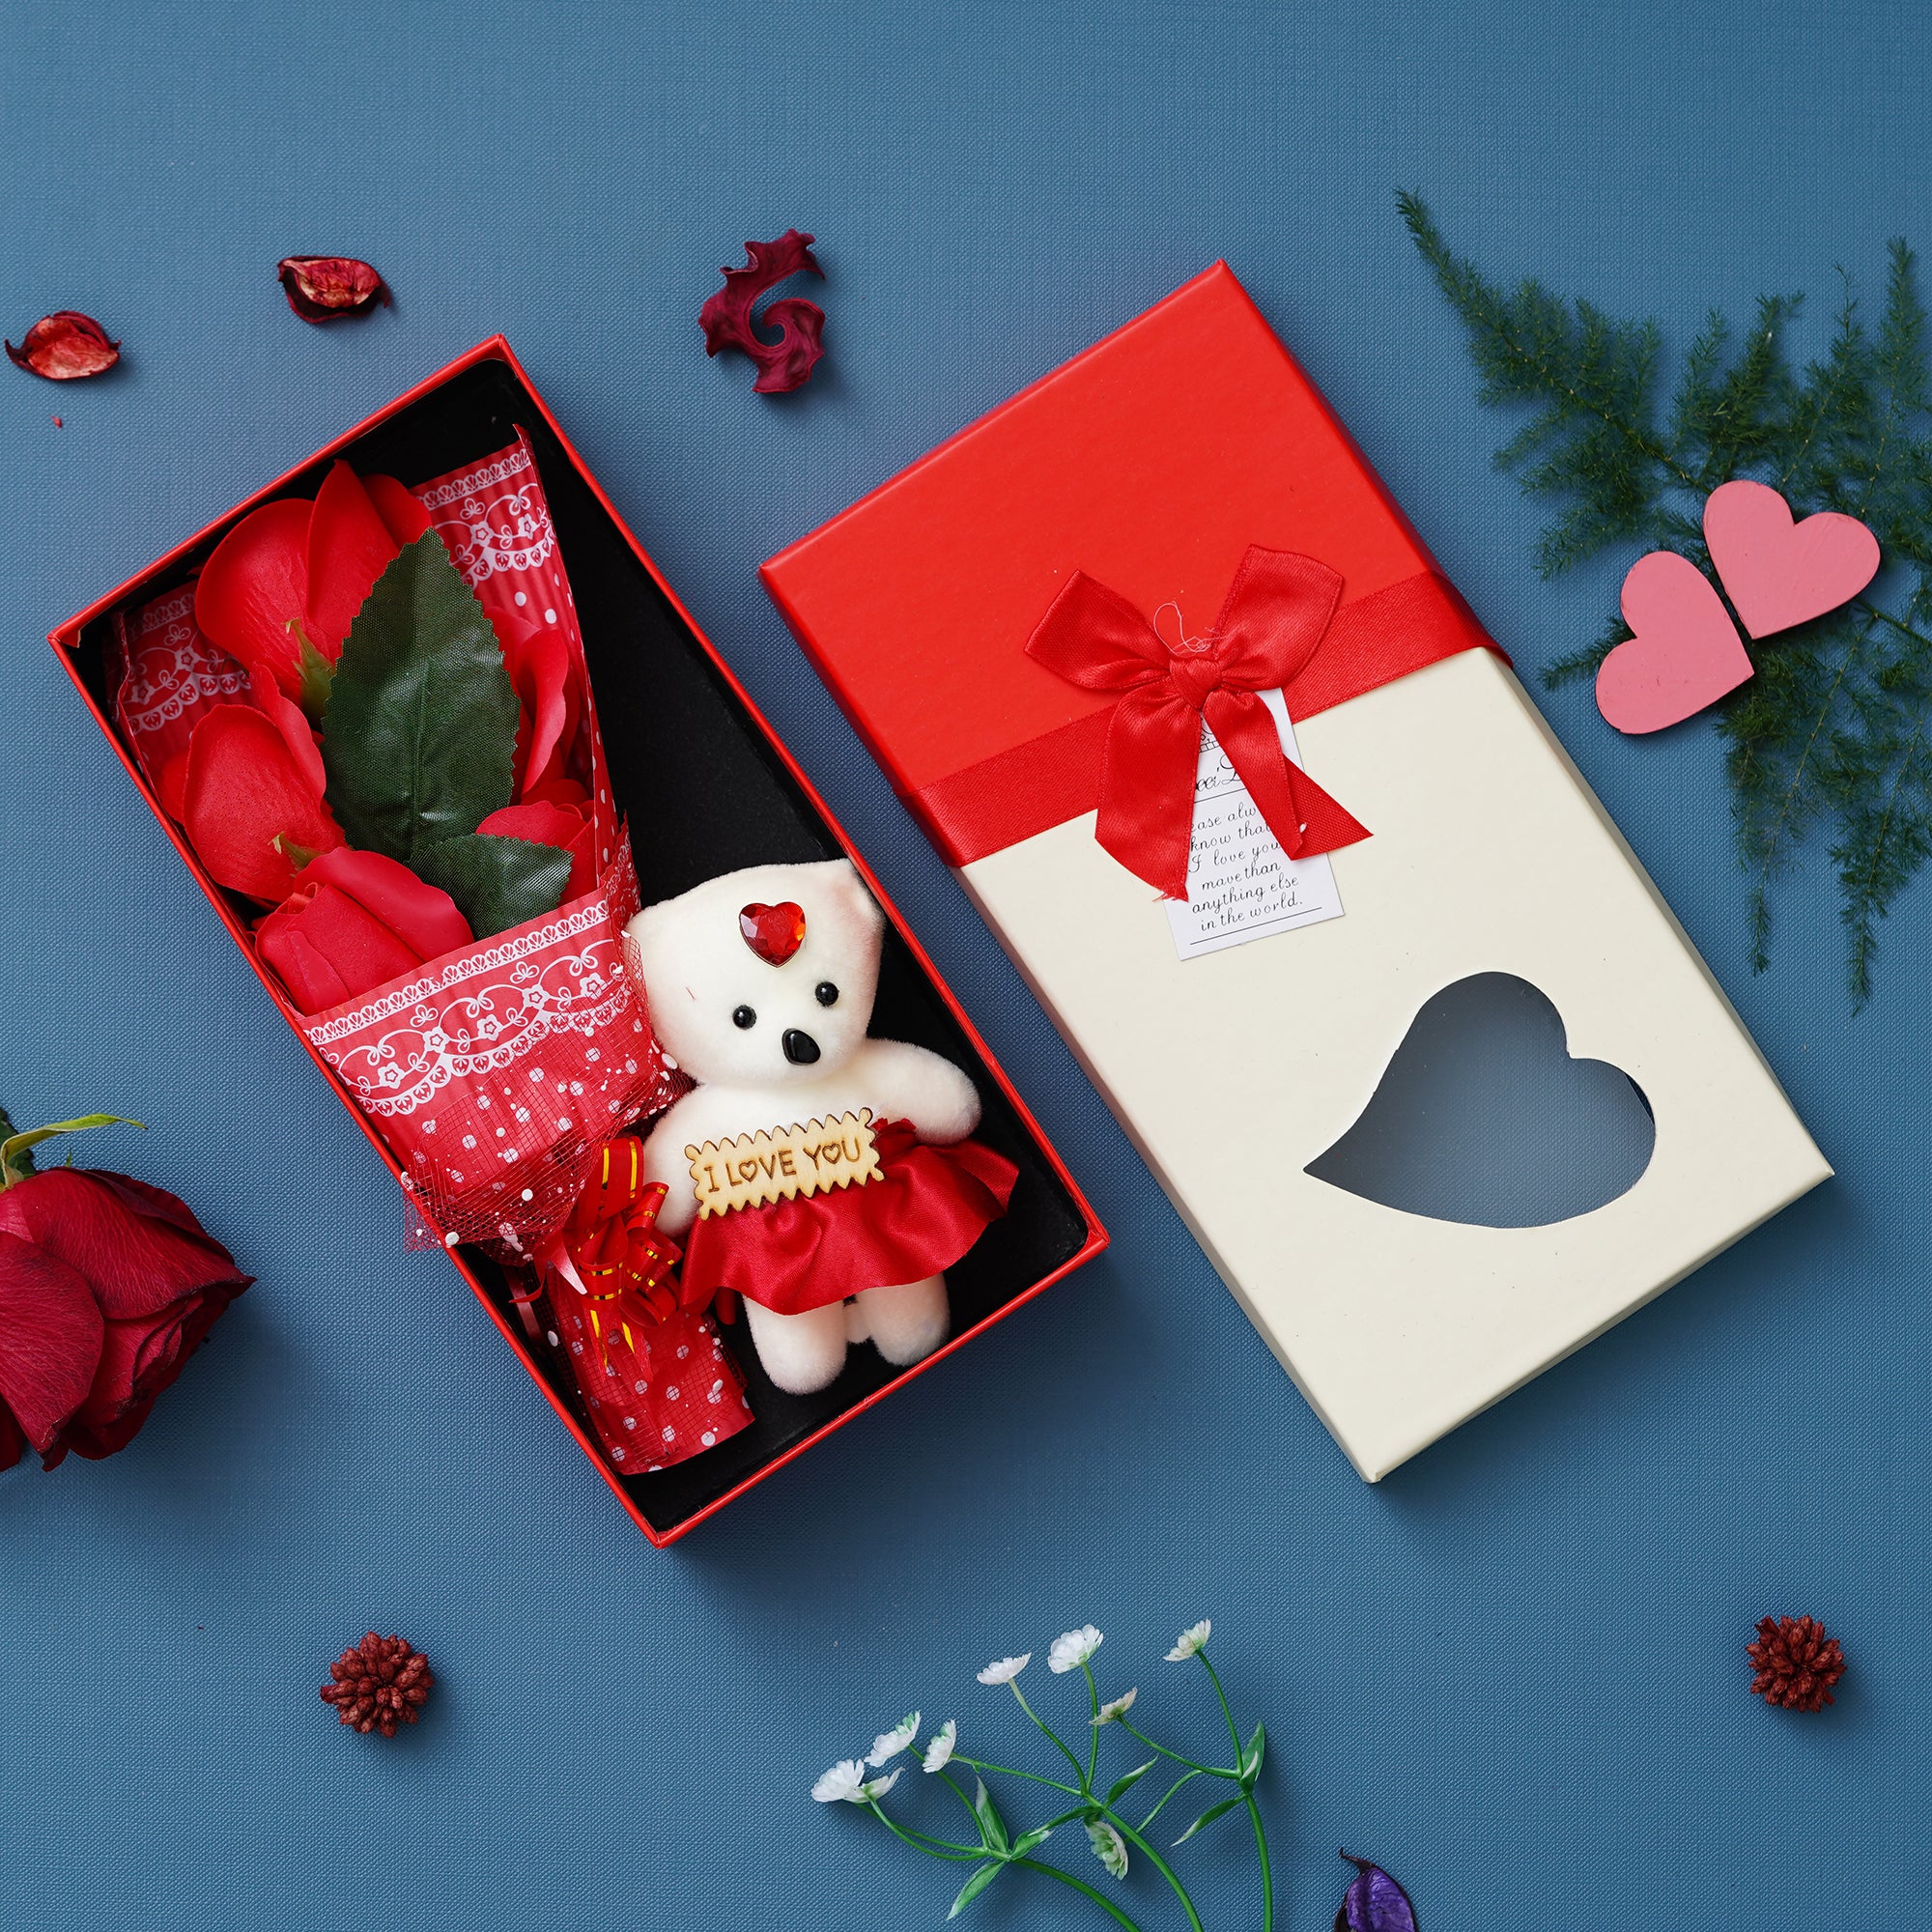 Valentine Combo of Pack of 8 Love Gift Cards, Red and White Heart Hugging Each Other Gift Set, Red Roses Bouquet and White, Red Teddy Bear Valentine's Rectangle Shaped Gift Box 5